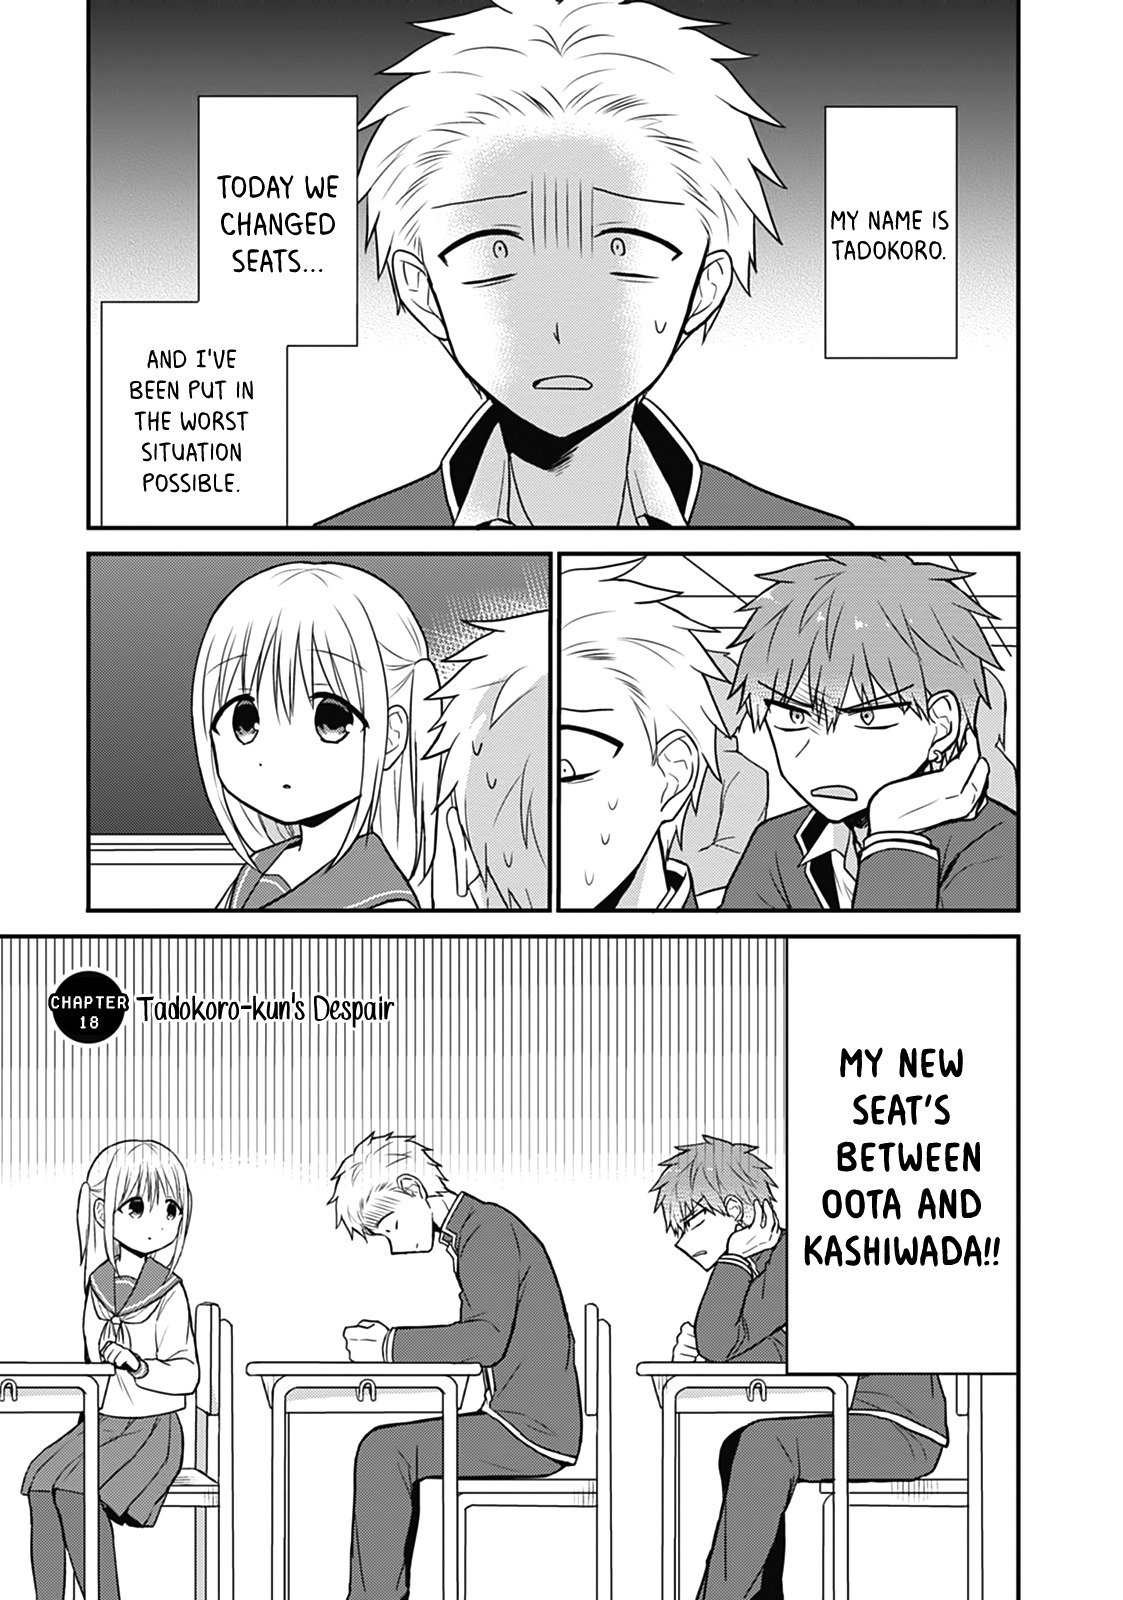 Expressionless Face Girl and Emotional Face Boy vol.2 ch.18